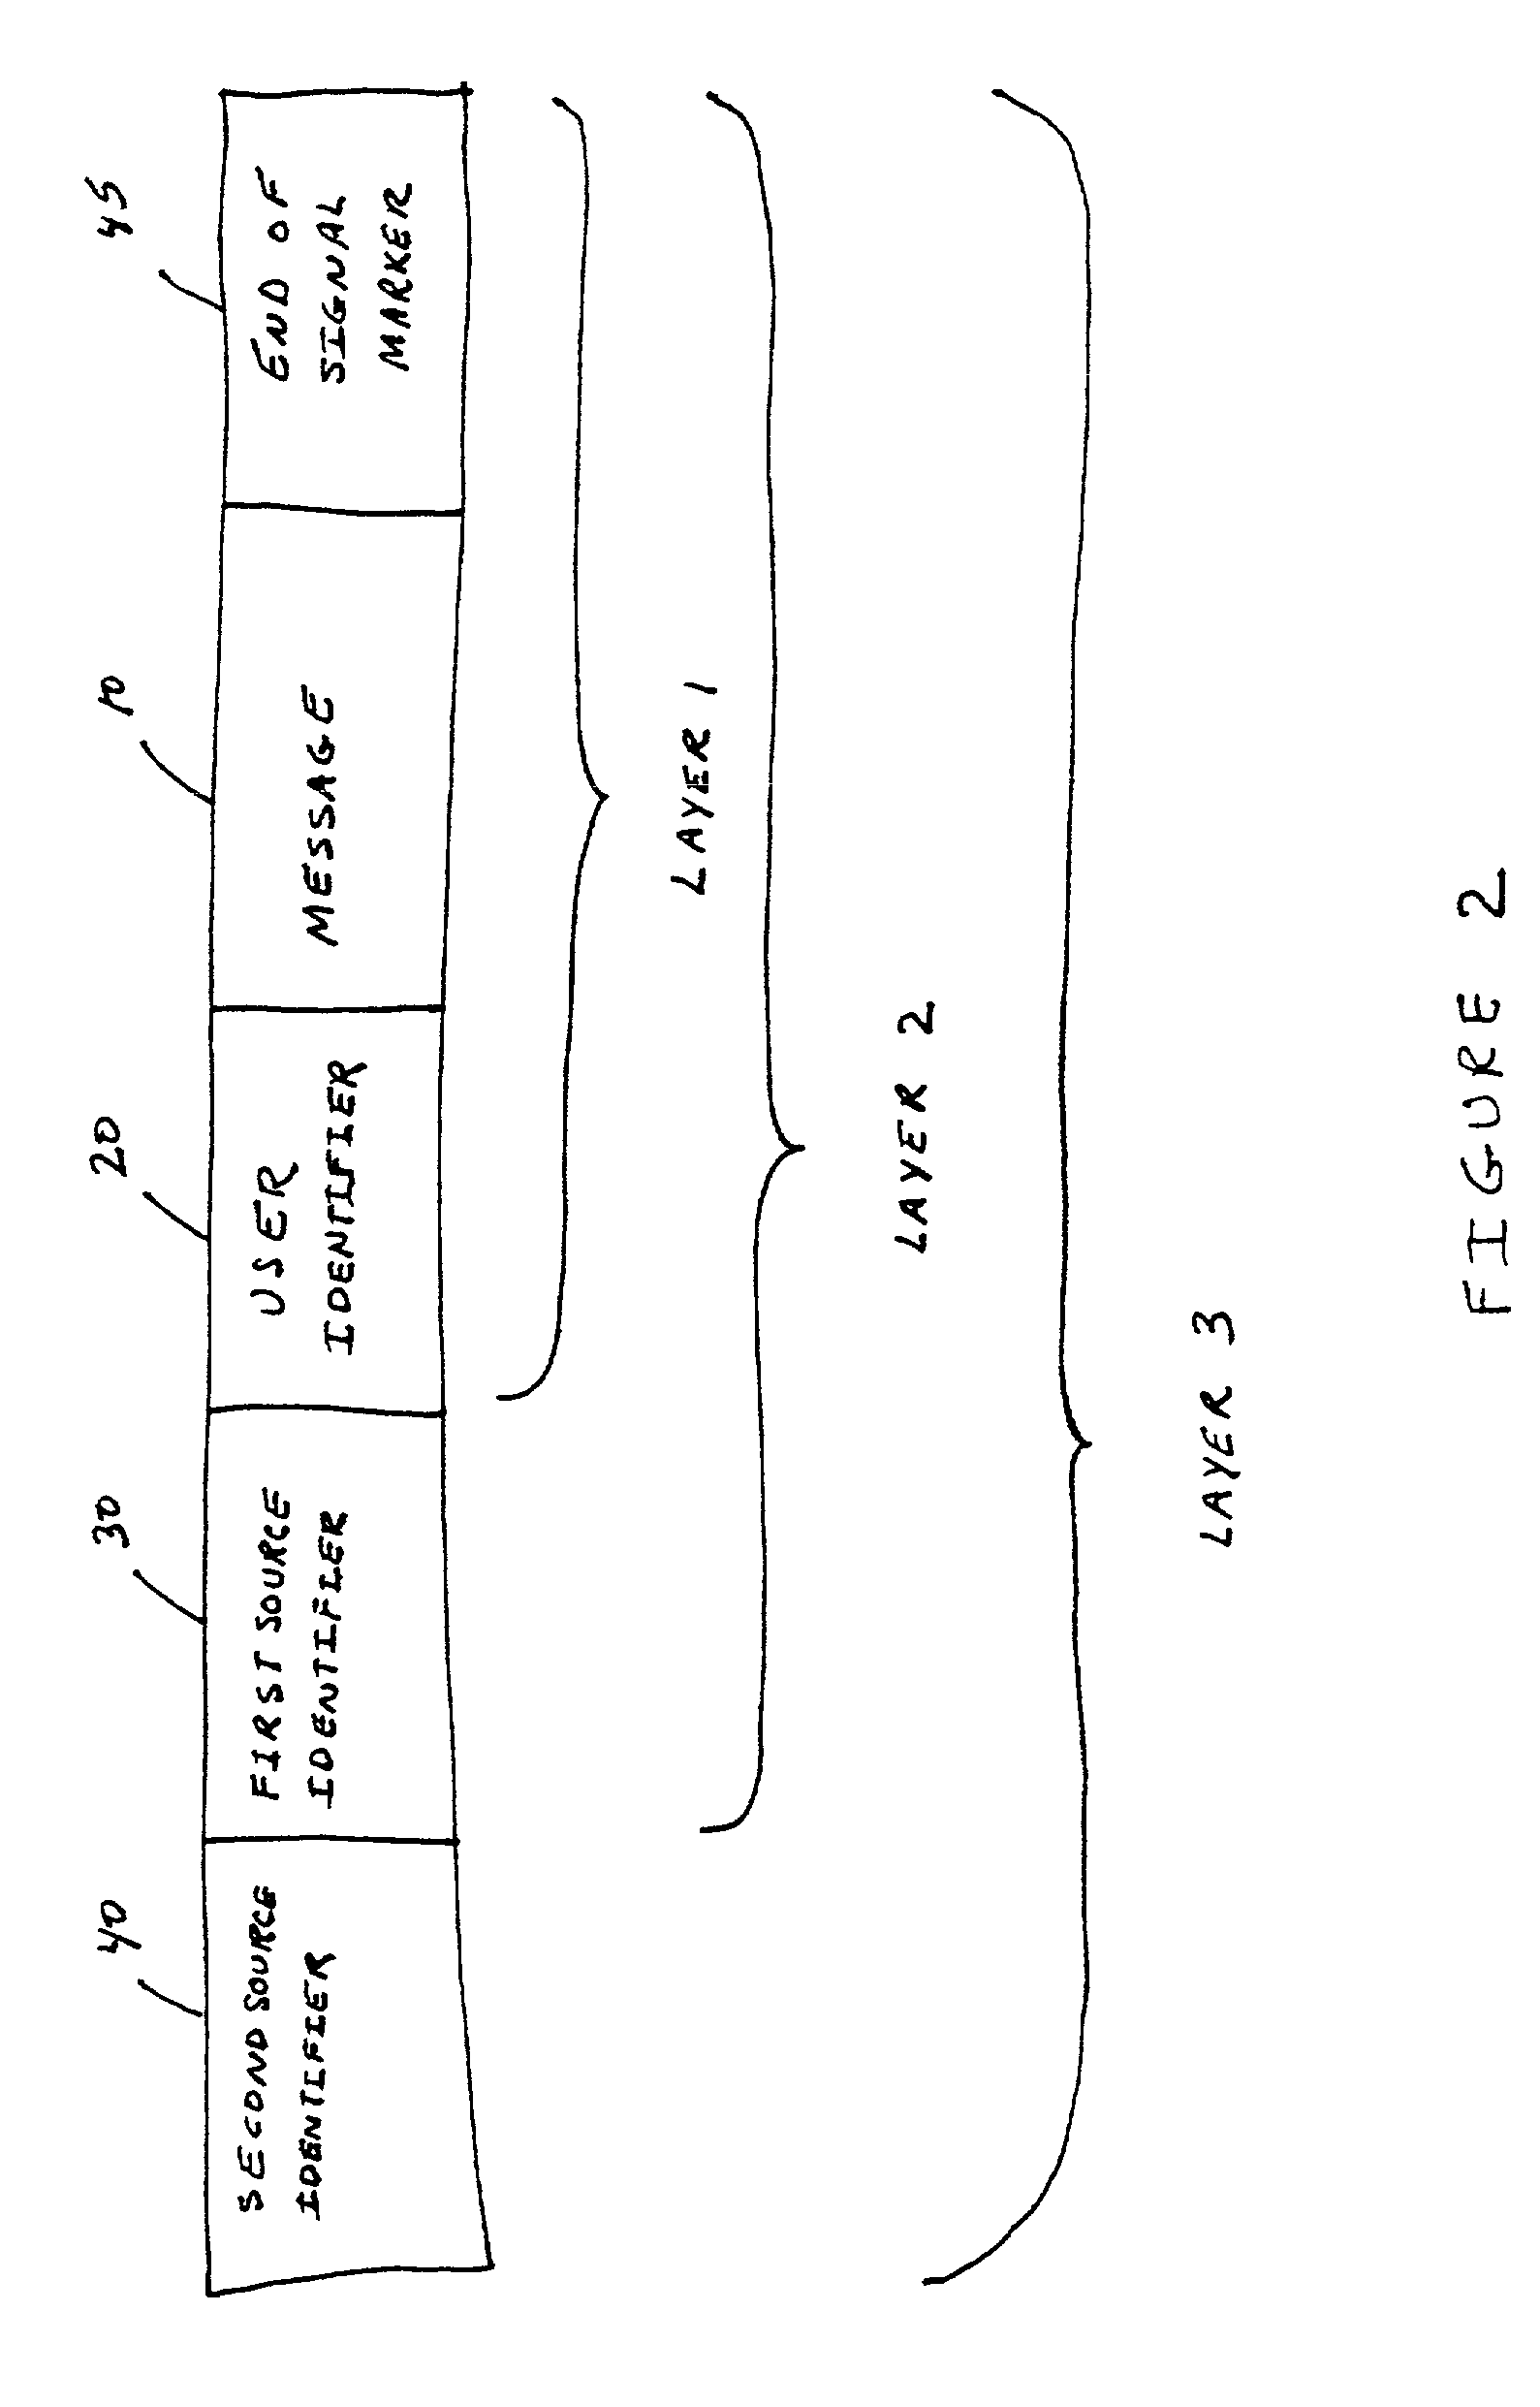 System and method for individualized broadcasts on a general use broadcast frequency